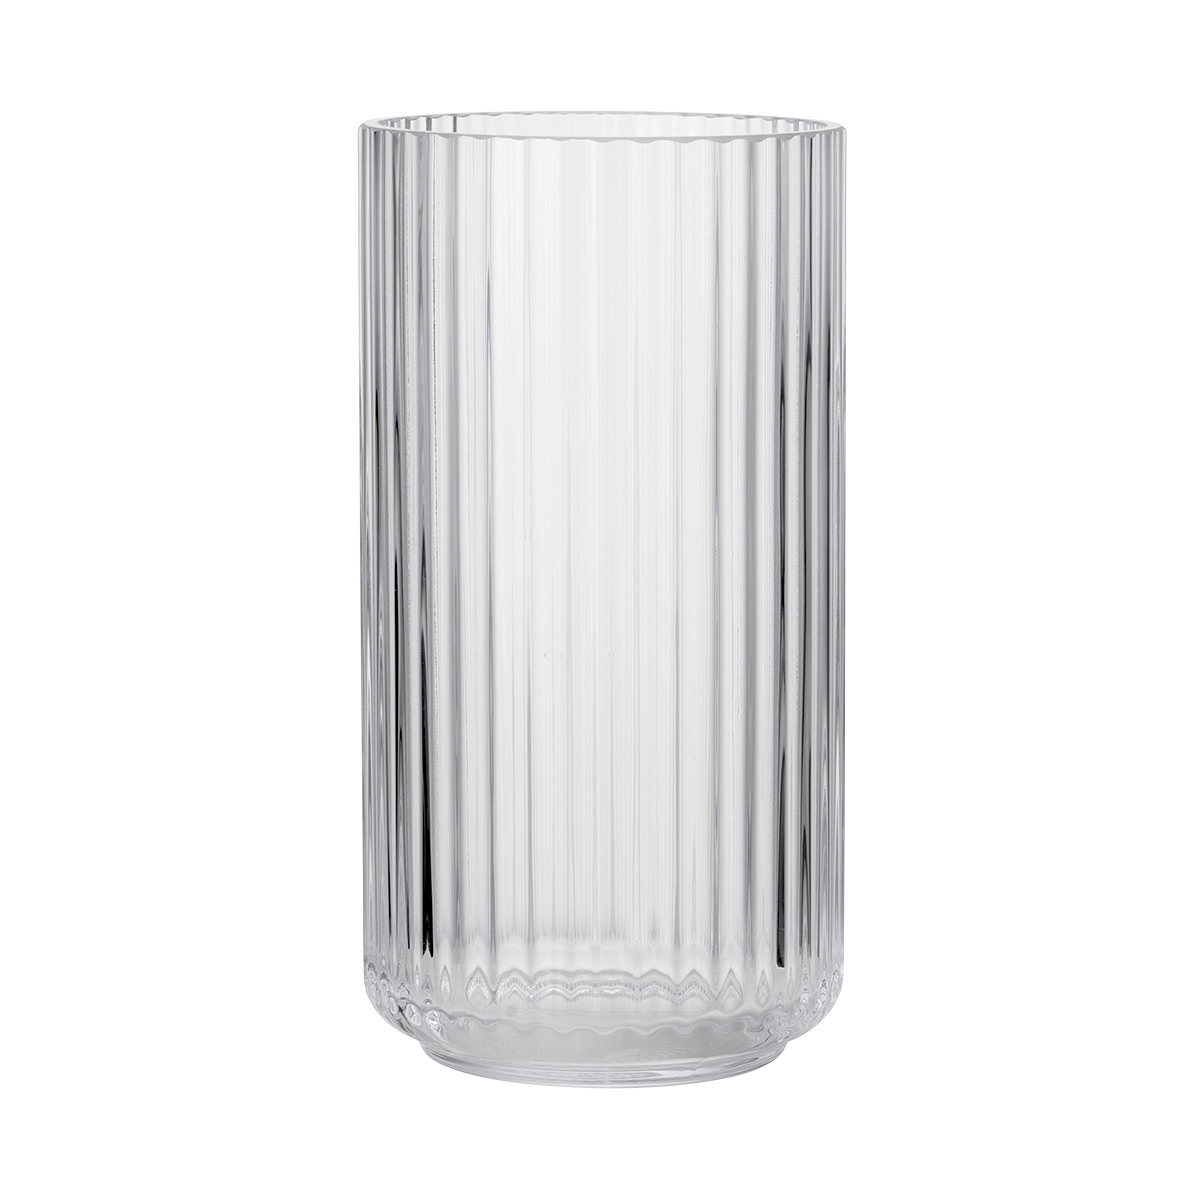 Lyngby Glass Vase | The Container Store